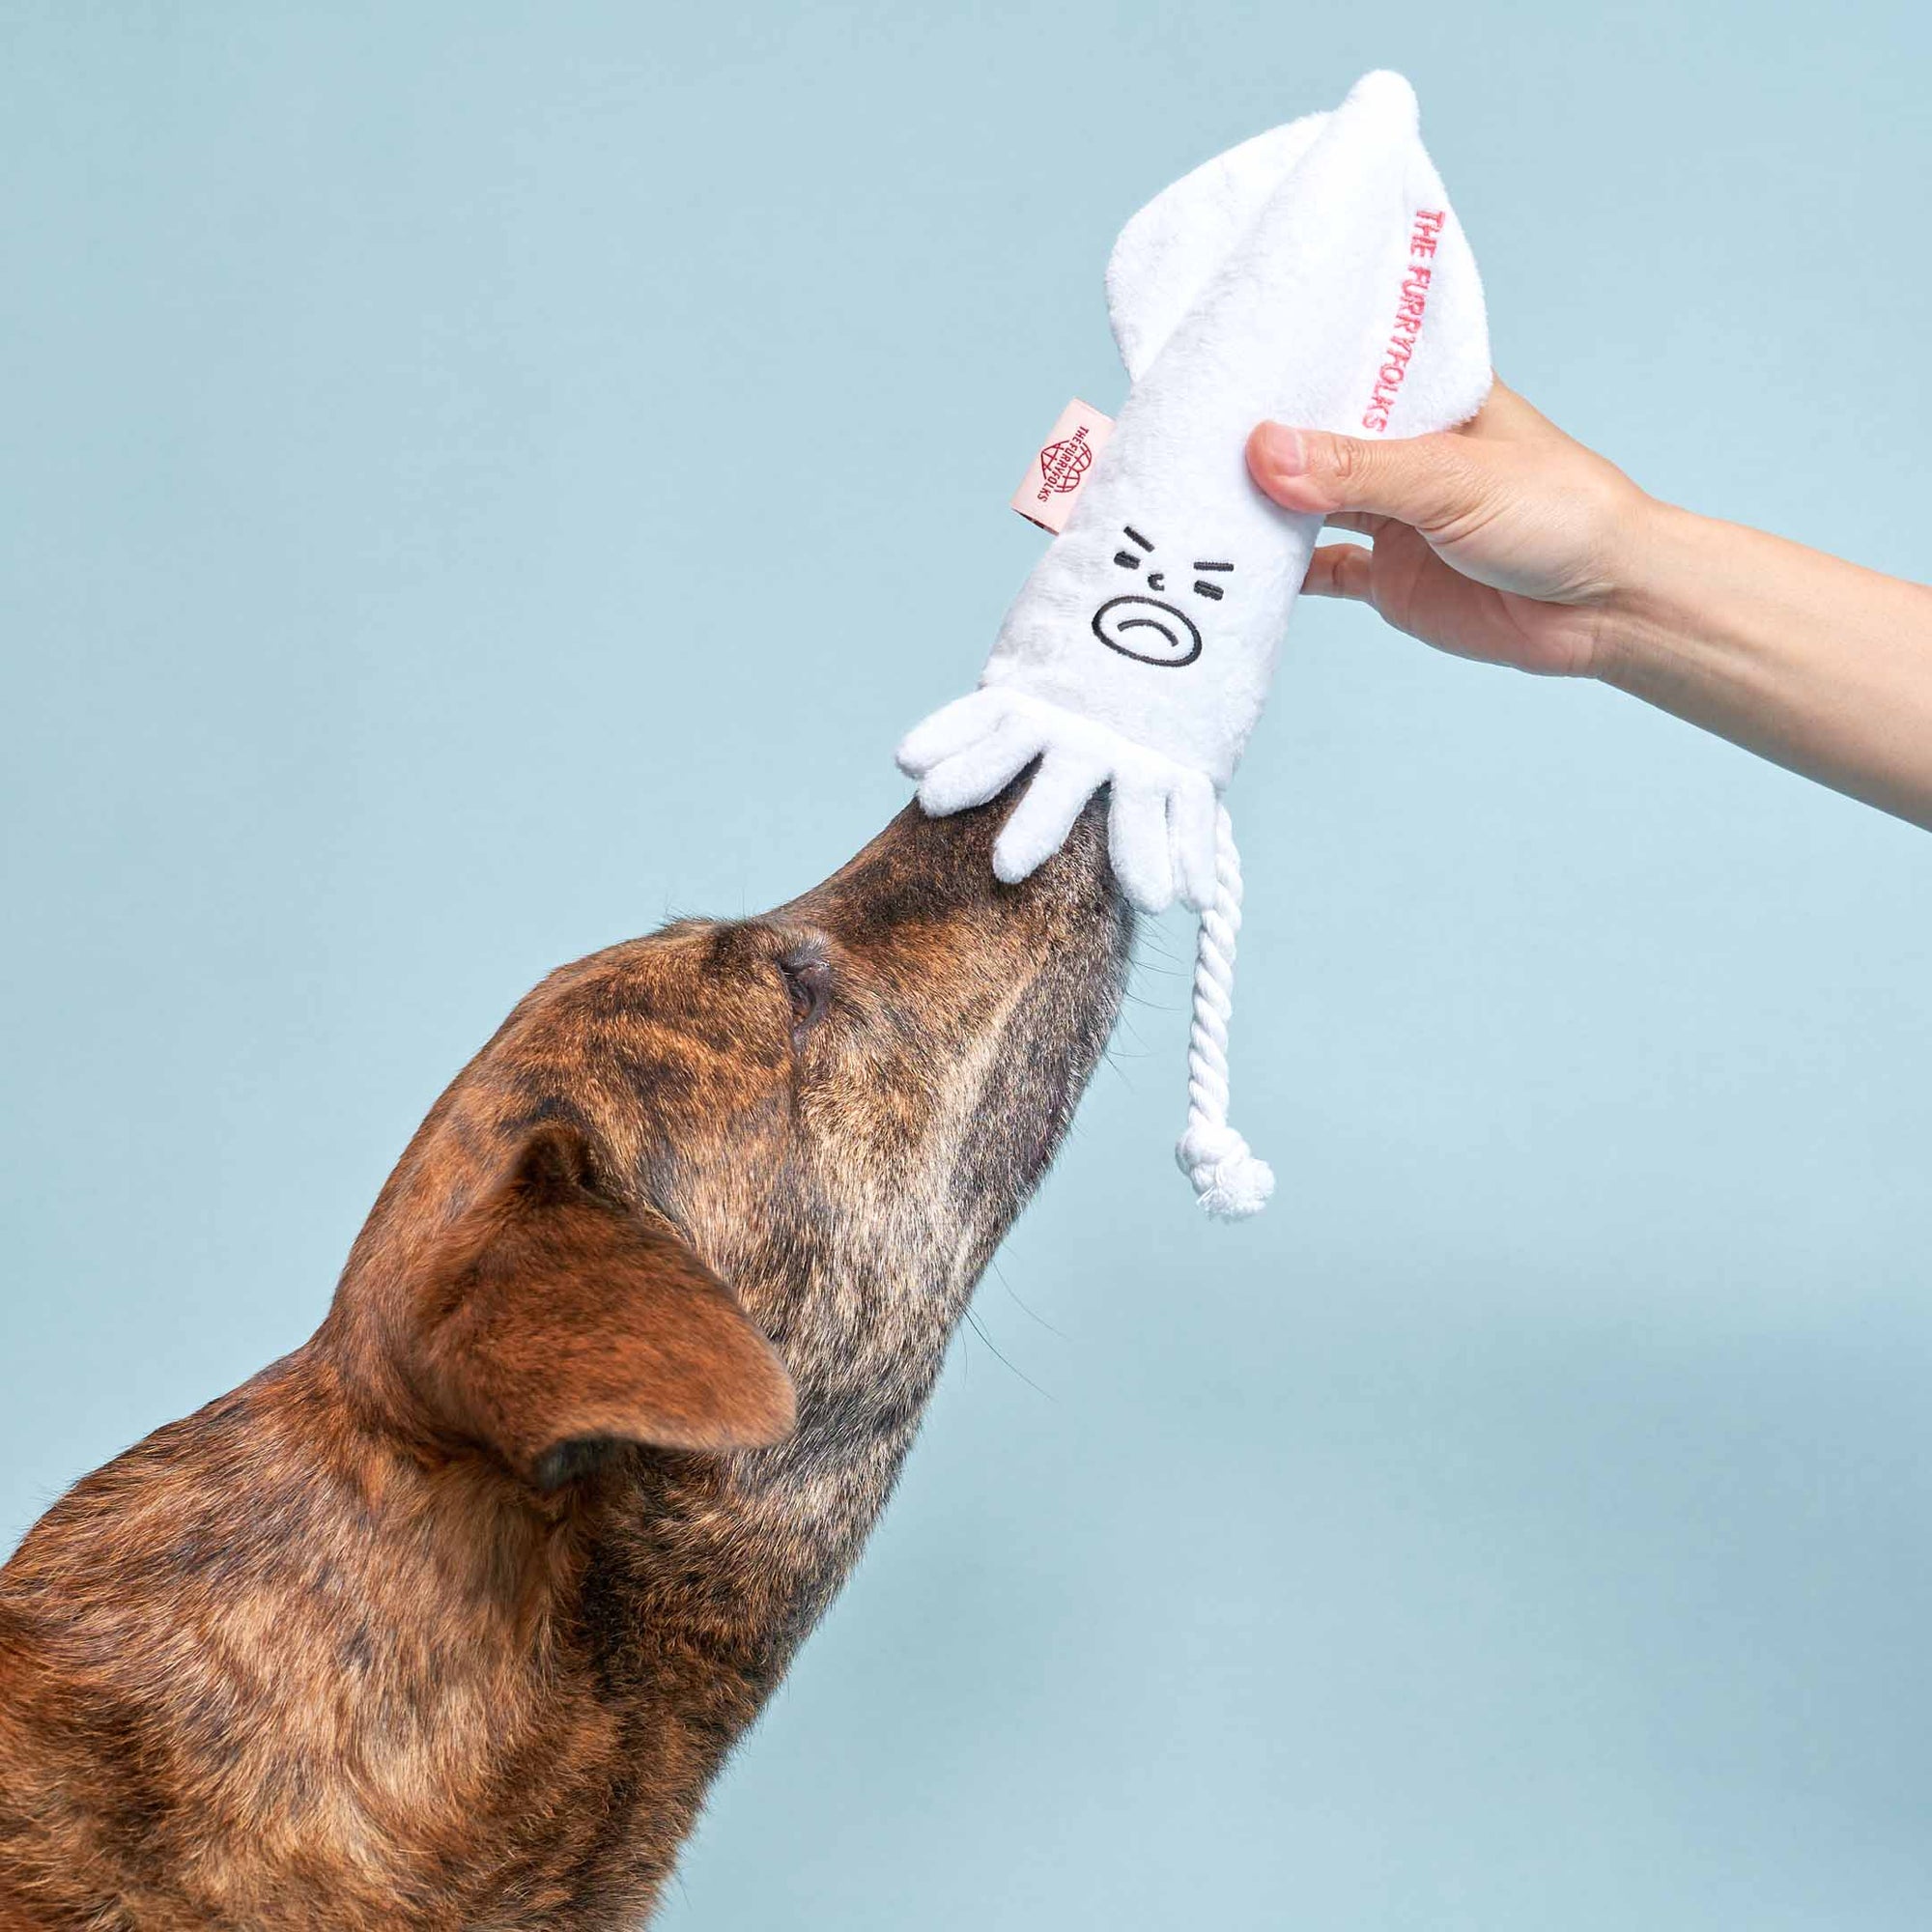 Brindle dog sniffing white squid nosework toy held by human hand